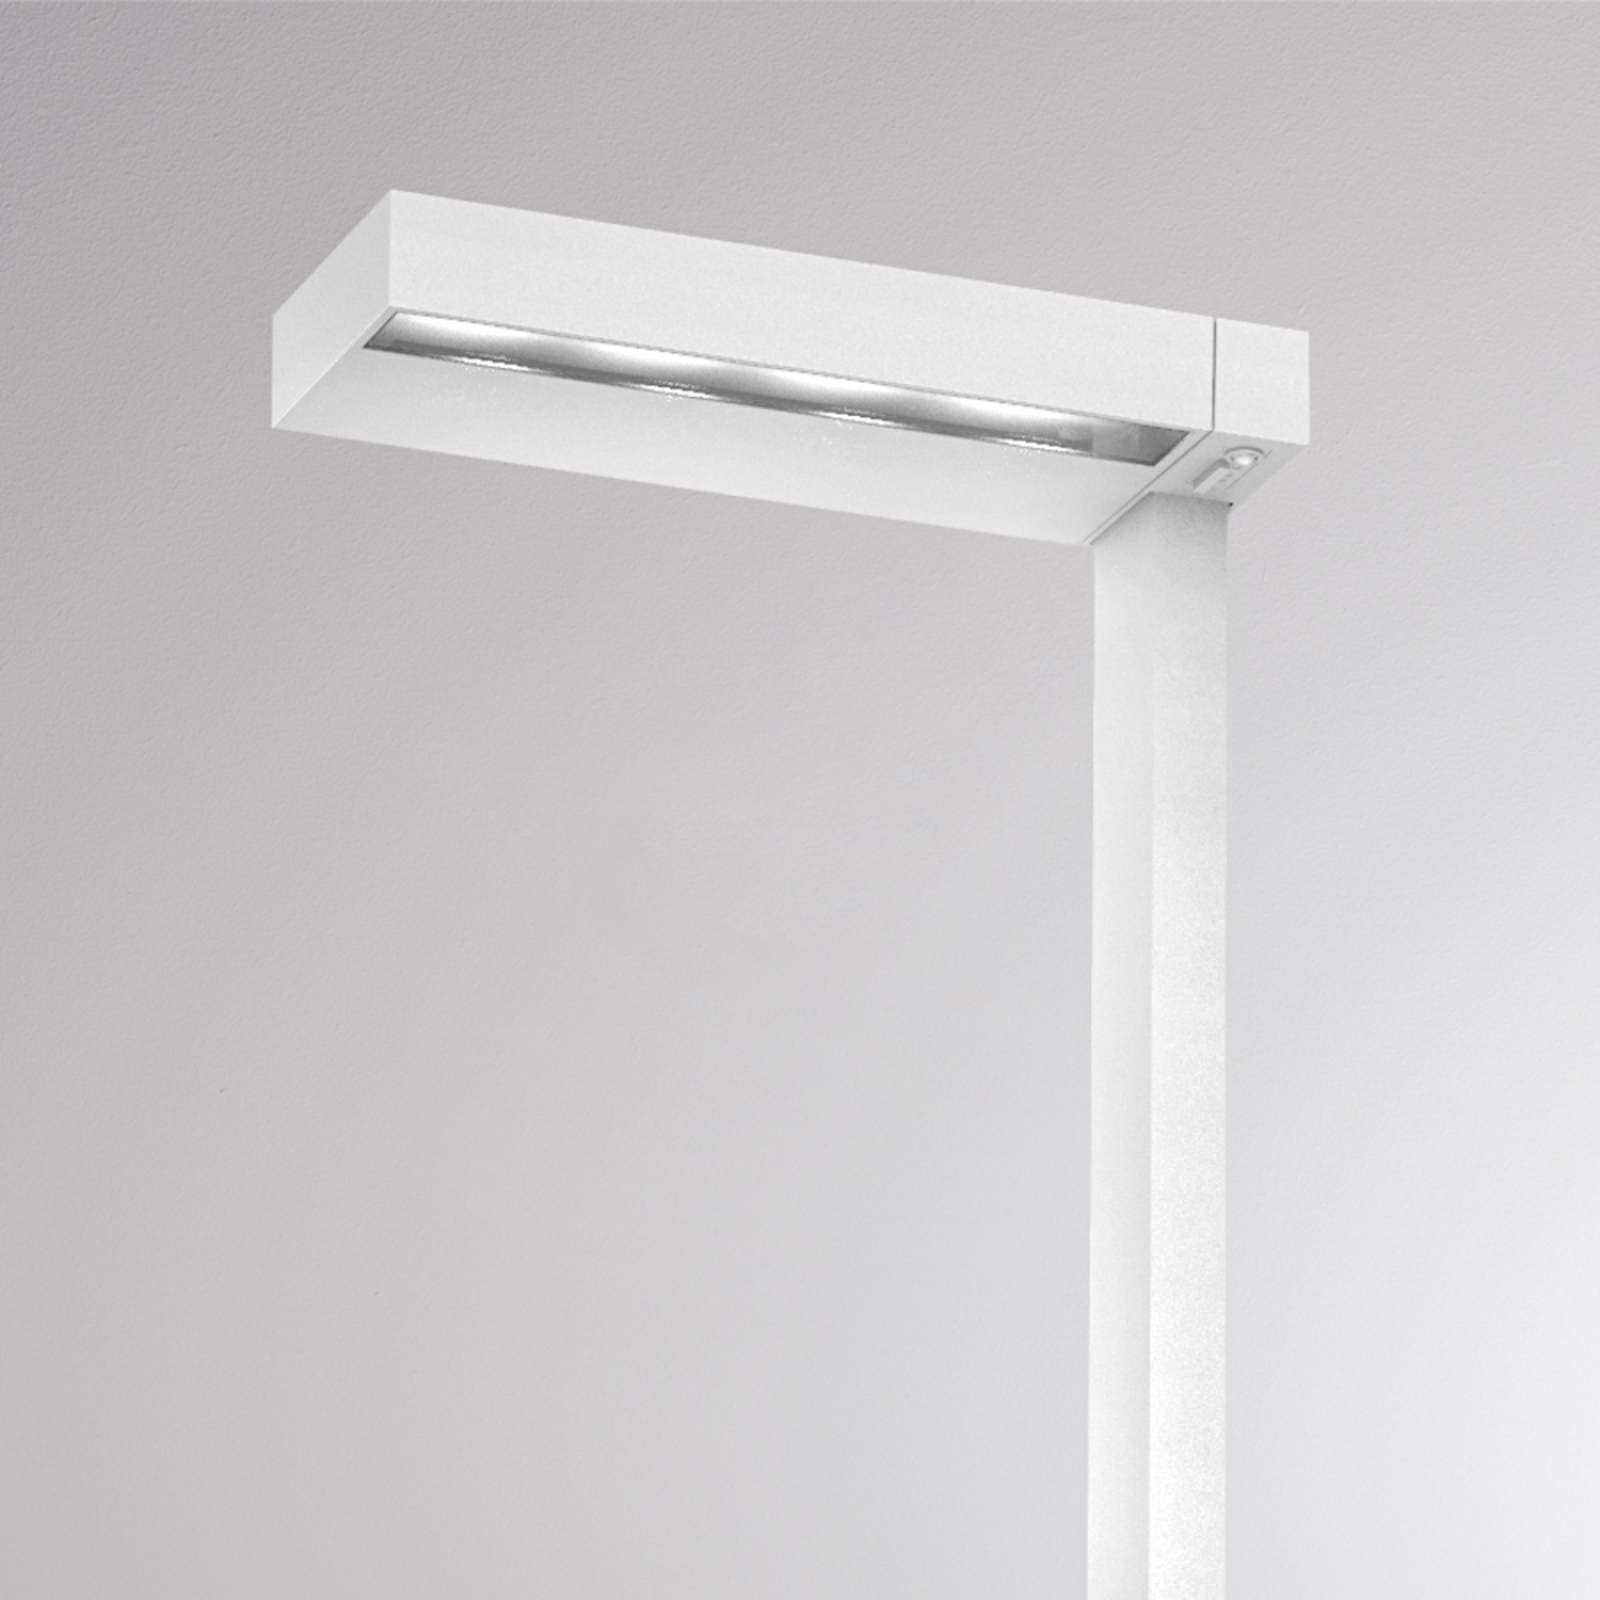 Molto Luce Concept Left F dimmable blanc